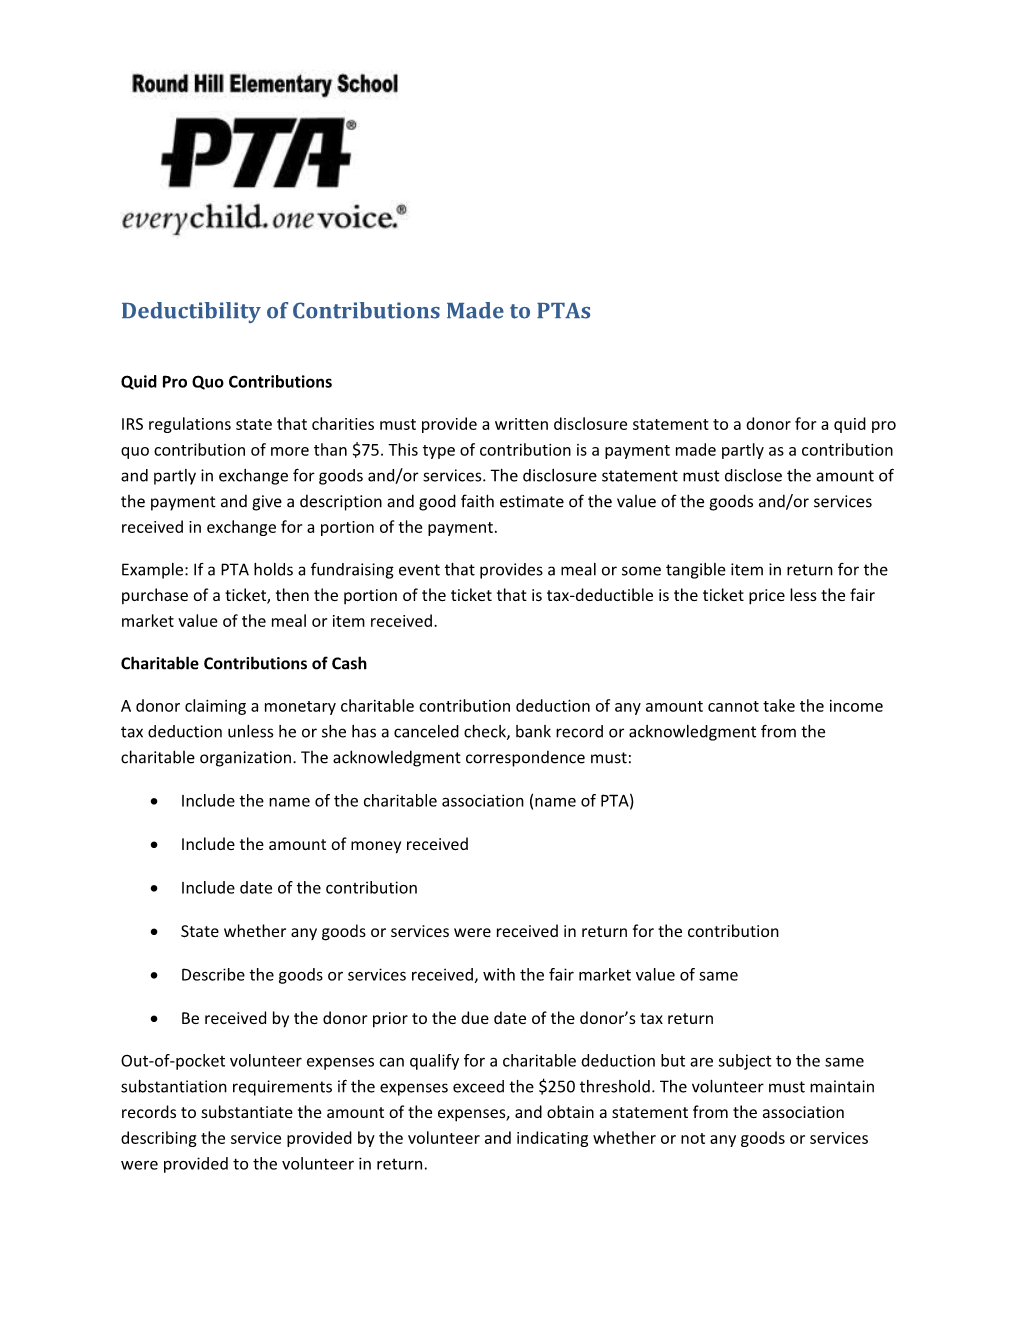 Deductibility of Contributions Made to Ptas